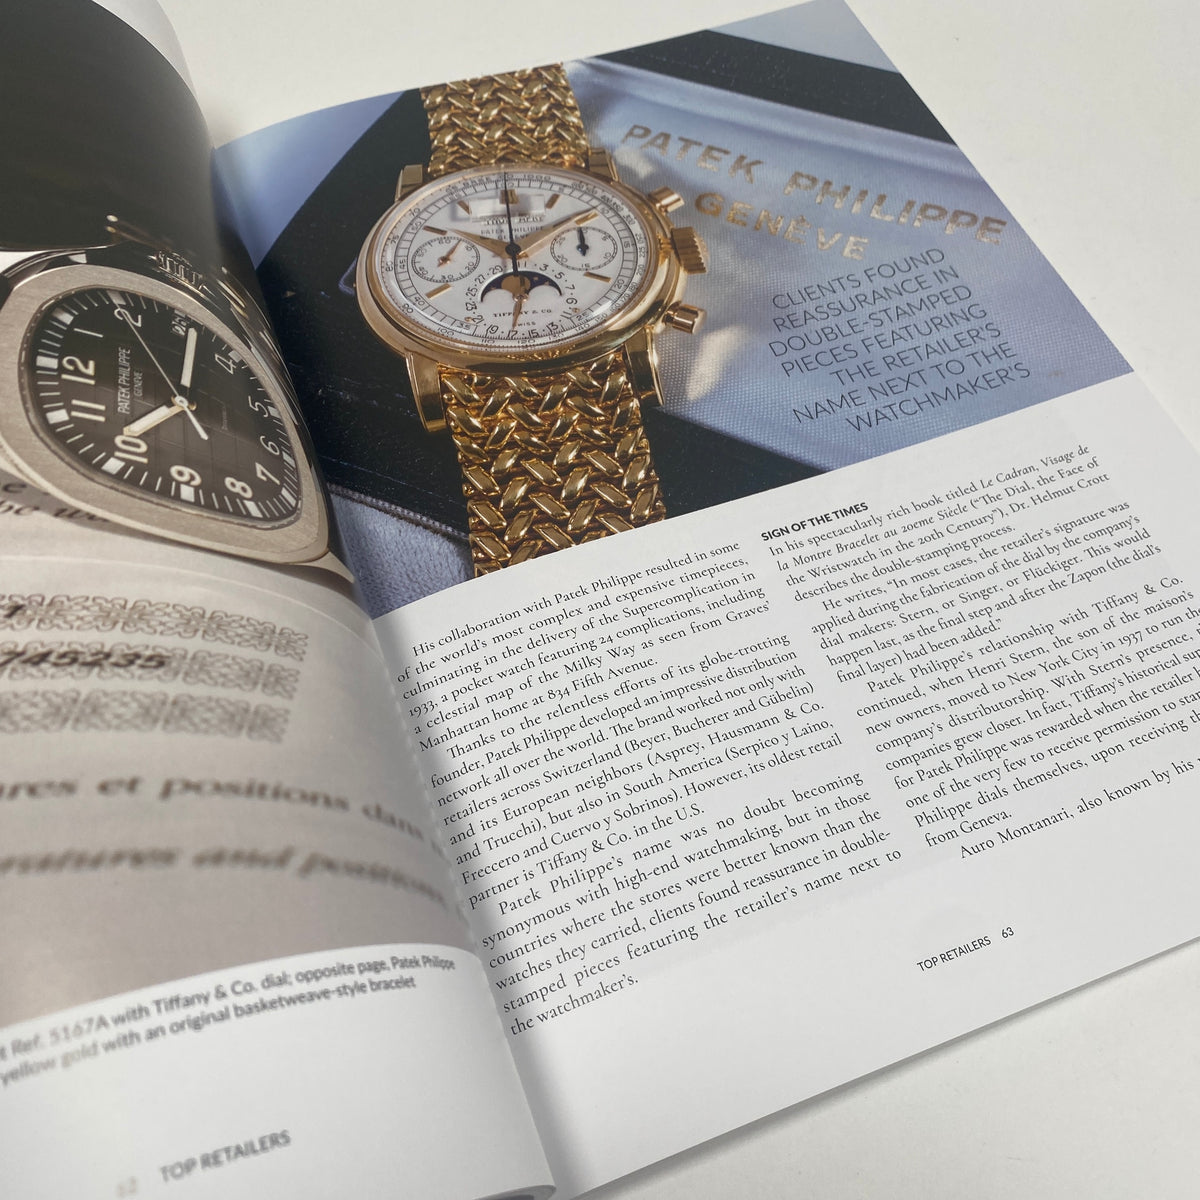 Revolution Top Retailers - The Global Business of Fine Watchmaking